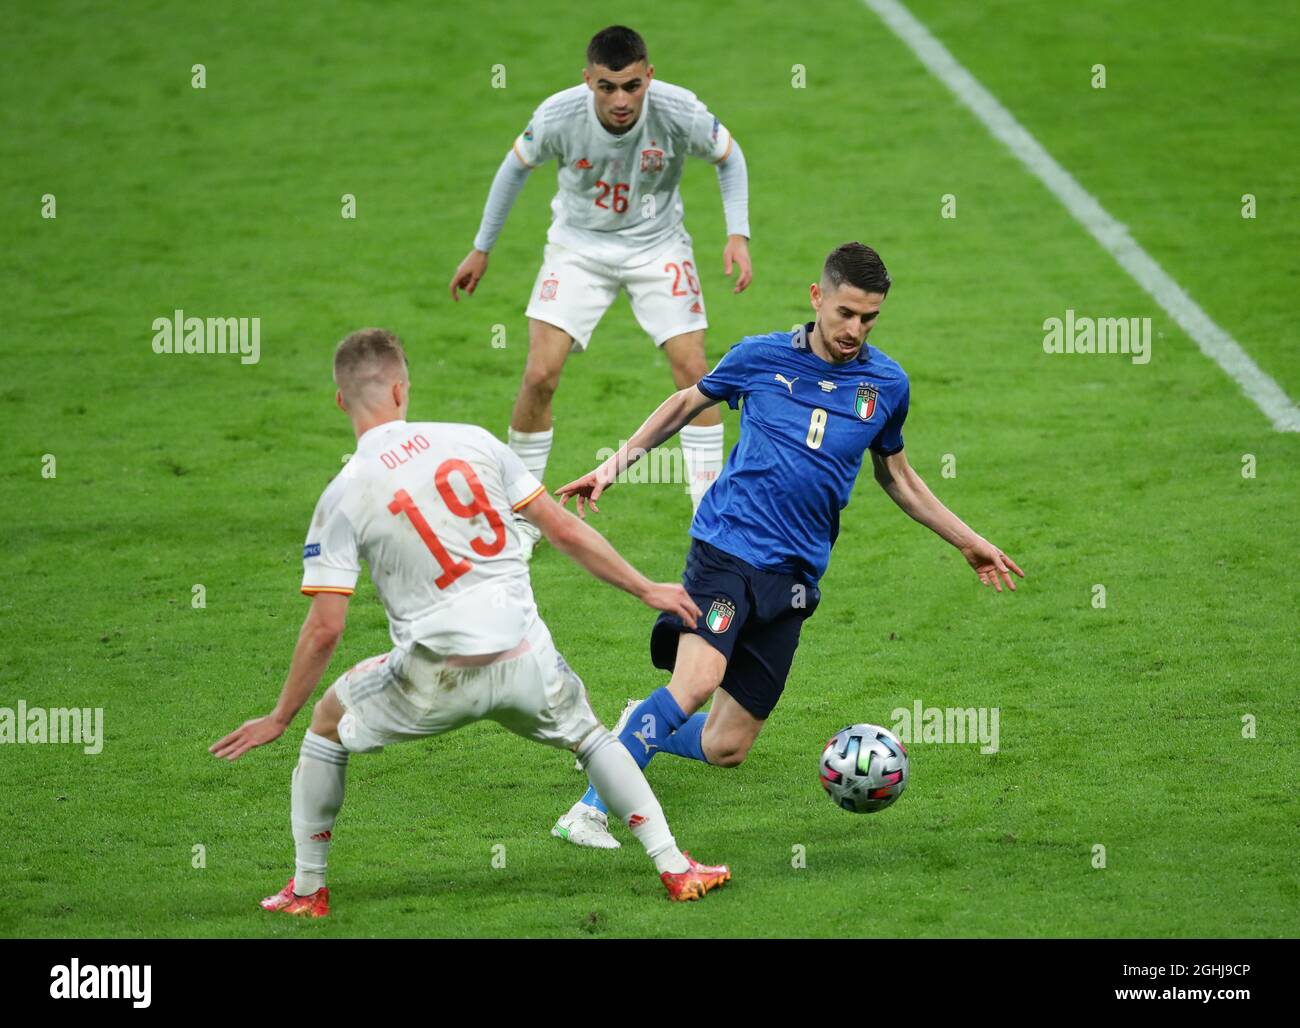 London, England, 6th July 2021. Jorginho of Italy skips past Dani Olmo of Spain  during the UEFA Euro 2020 match at Wembley Stadium, London. Picture credit should read: David Klein / Sportimage via PA Images Stock Photo